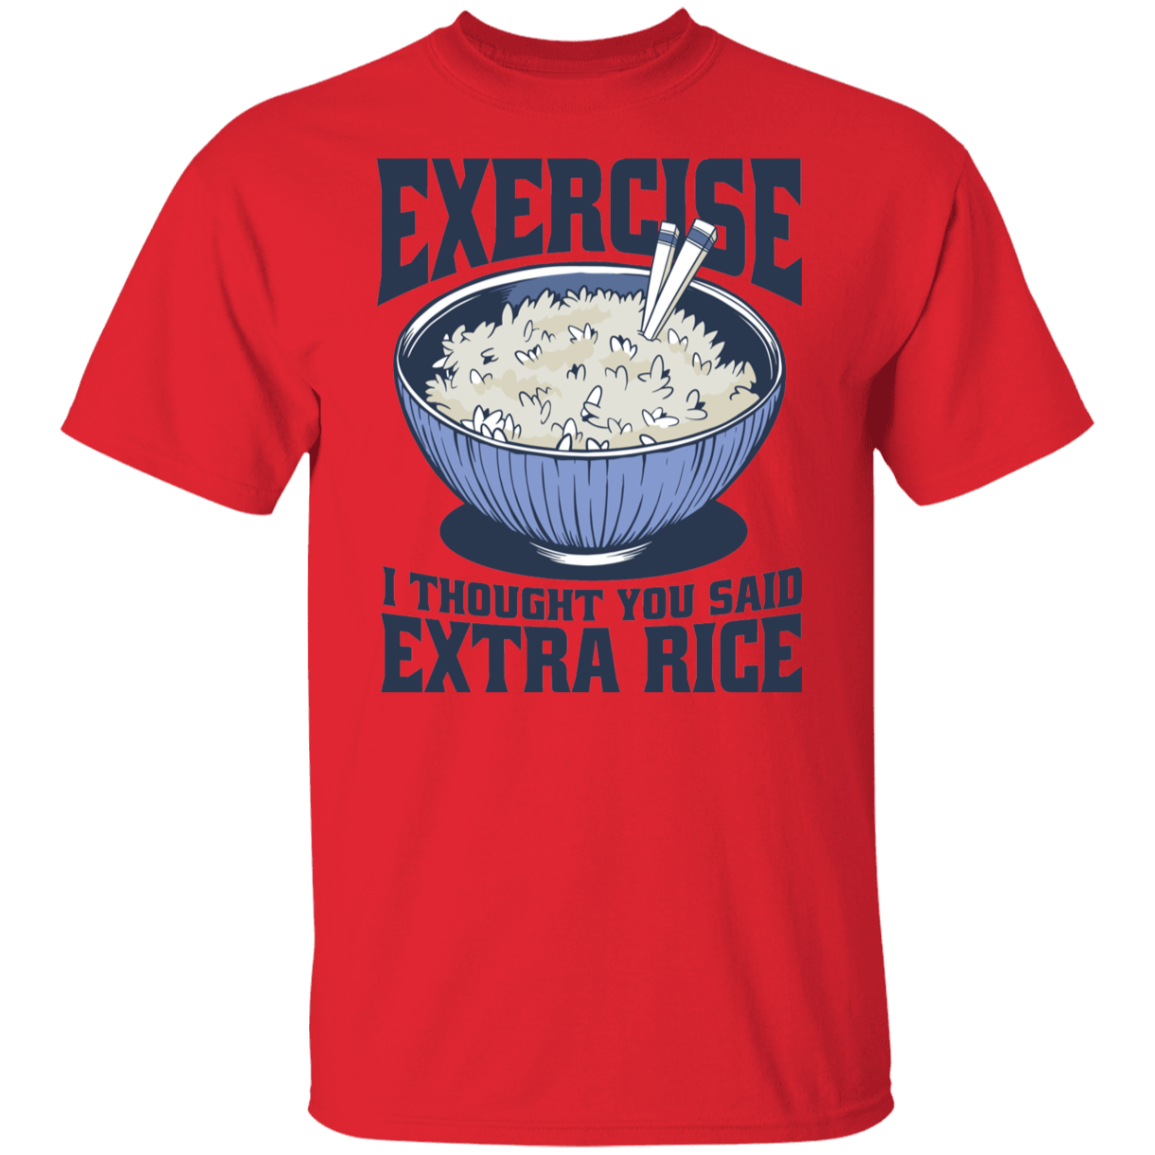 Exercise Extra Rice T-Shirt